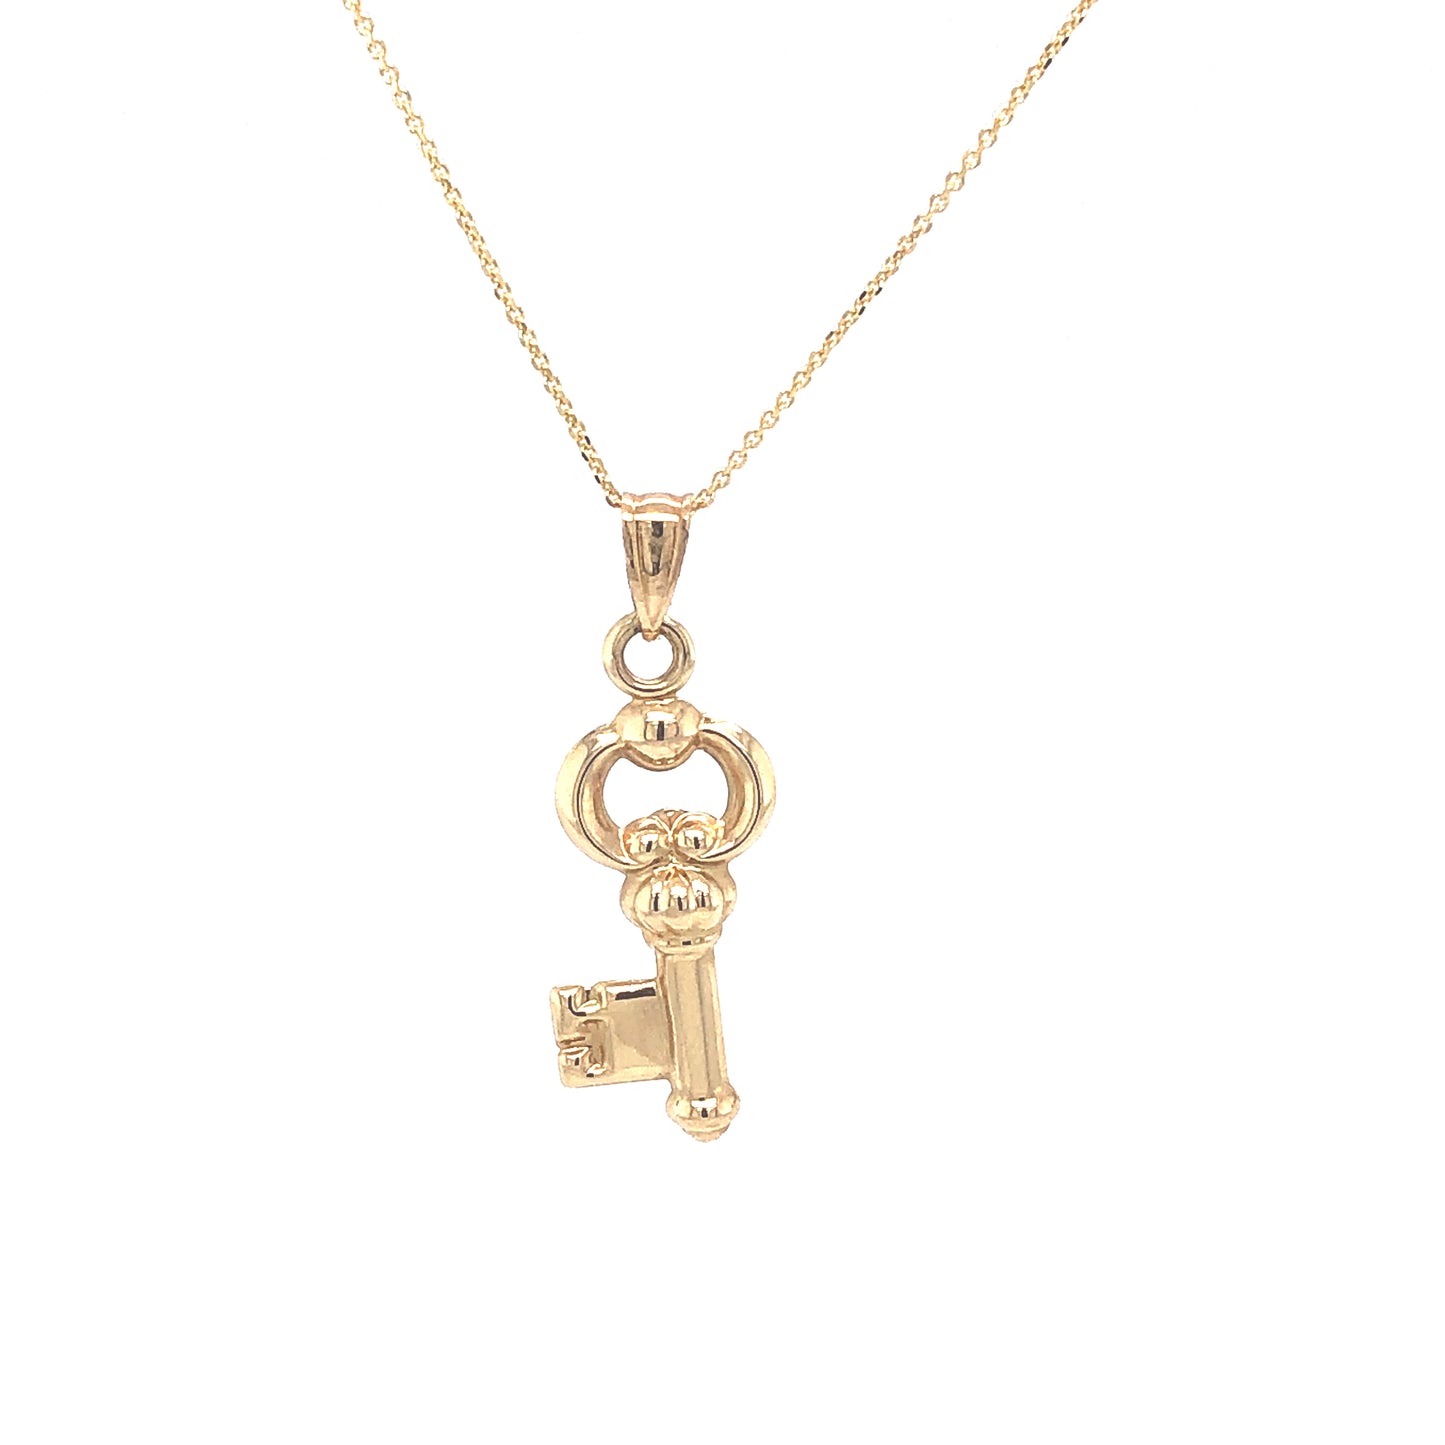 Vintage Key 14k Gold Pendant | Luby Gold Collection | Luby 